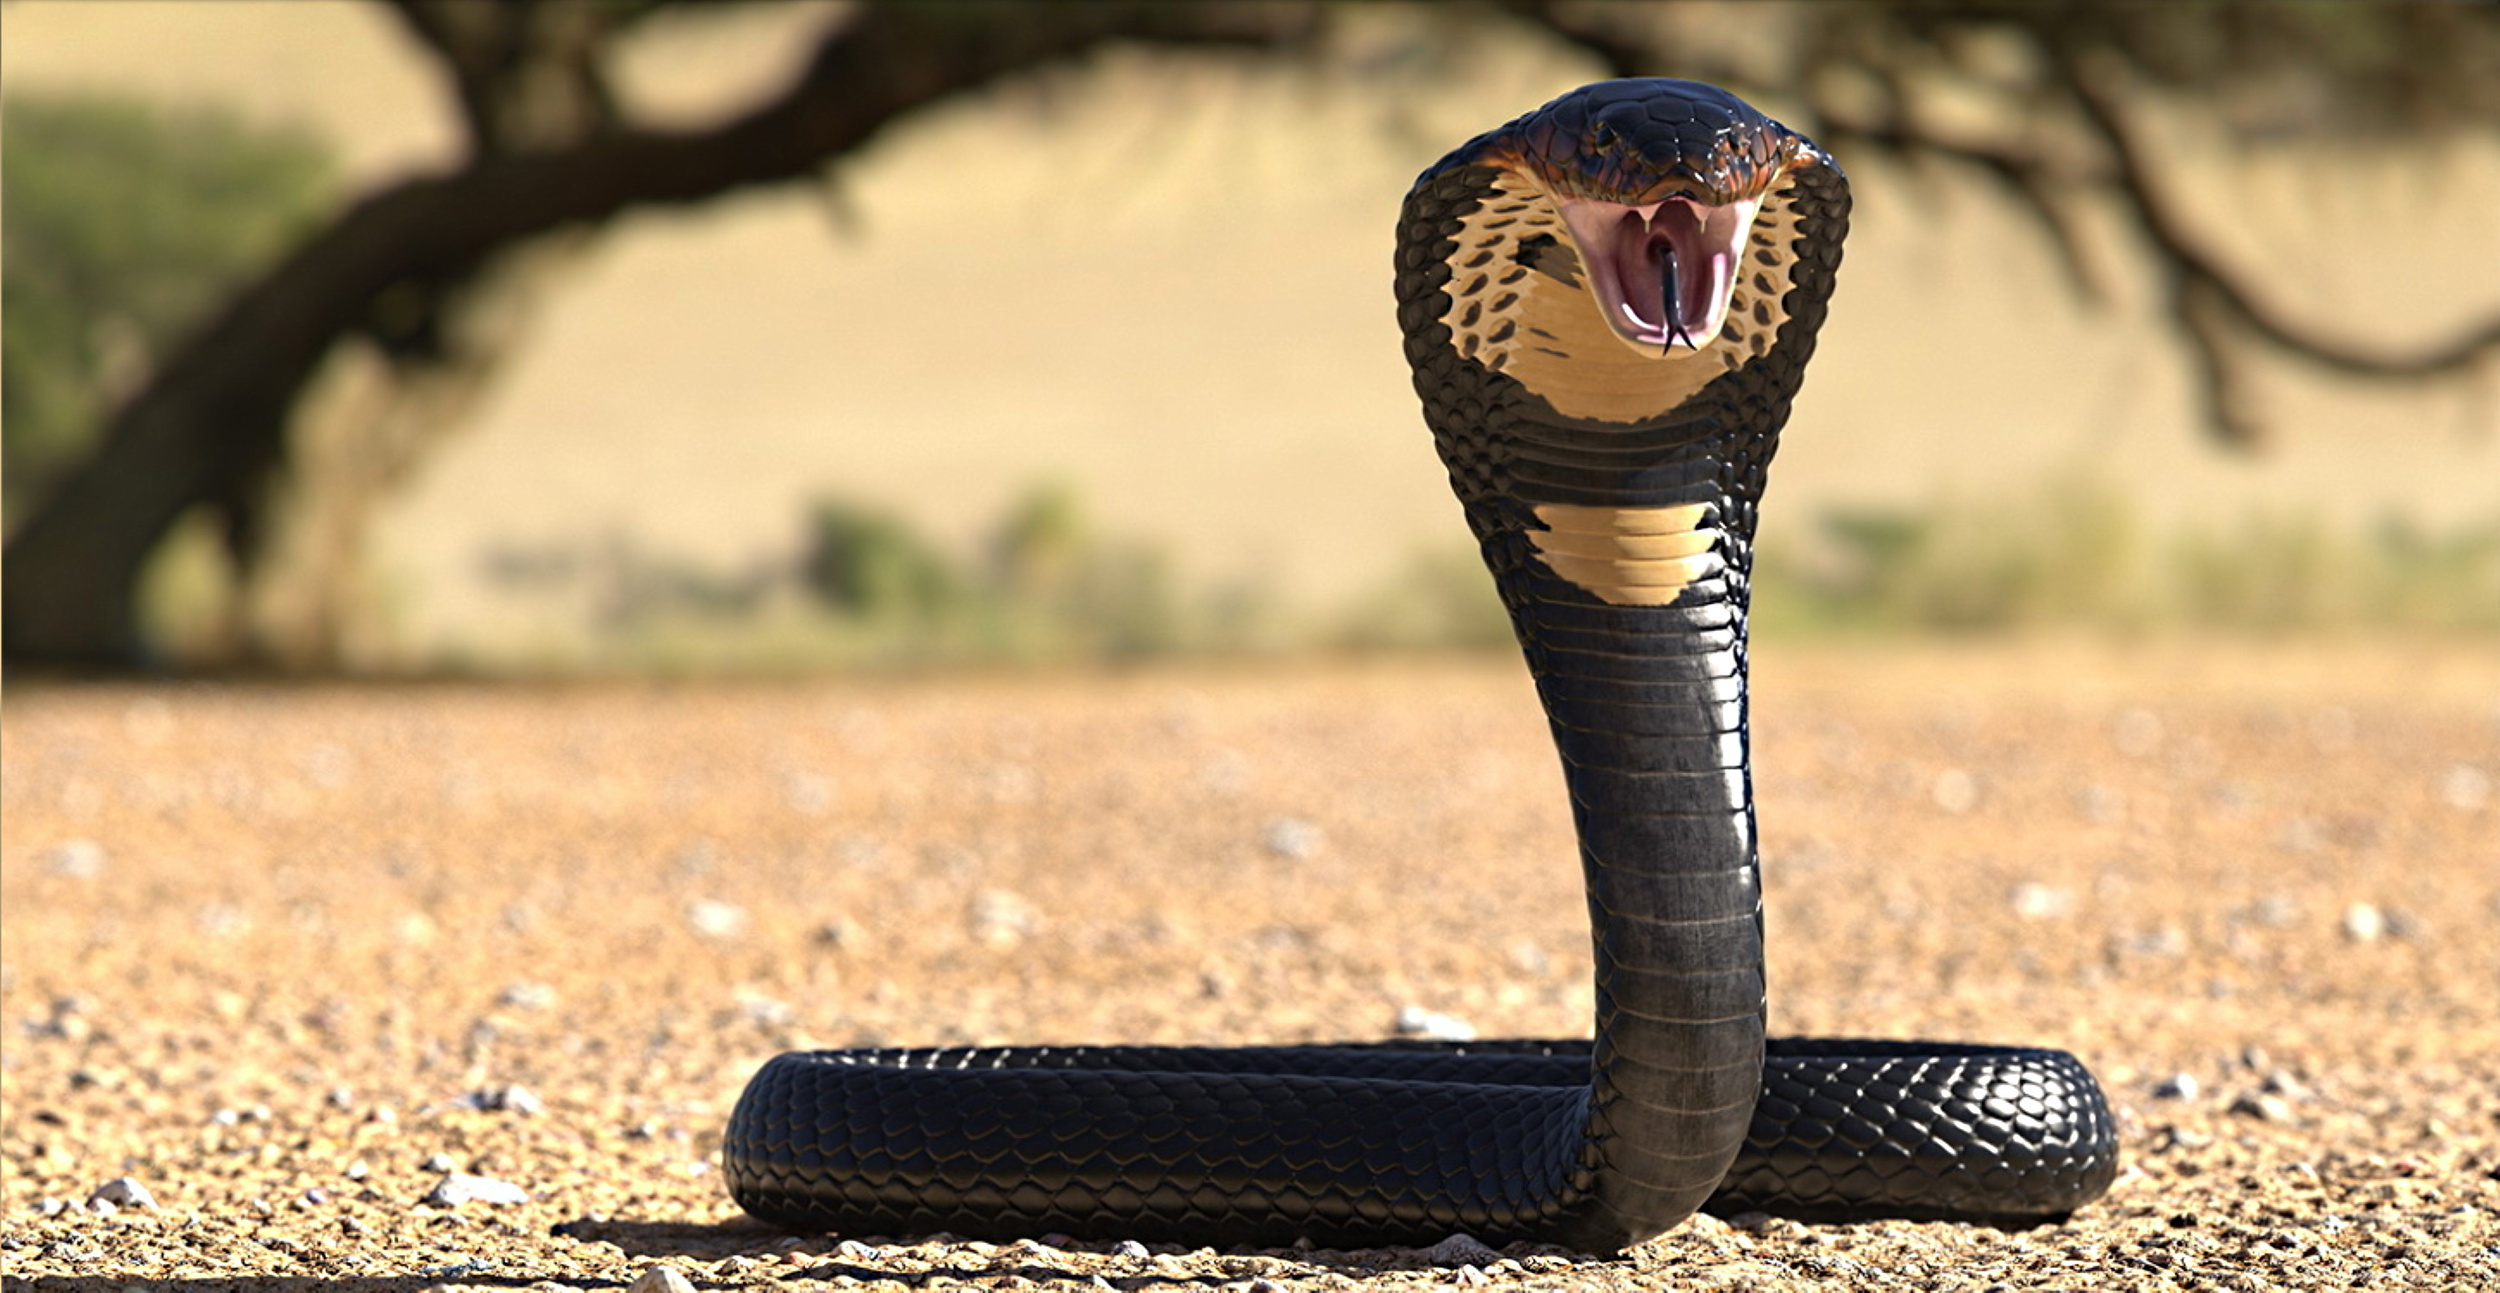 <p>In Portuguese, “cobra” directly translates to “snake with a hood” for the species’ distinctive look. The snakes aren’t native to Portugal but are commonly found throughout the country’s former colonies in Asia.</p><p><a href='https://www.msn.com/en-us/community/channel/vid-cj9pqbr0vn9in2b6ddcd8sfgpfq6x6utp44fssrv6mc2gtybw0us'>Follow us on MSN to see more of our exclusive lifestyle content.</a></p>